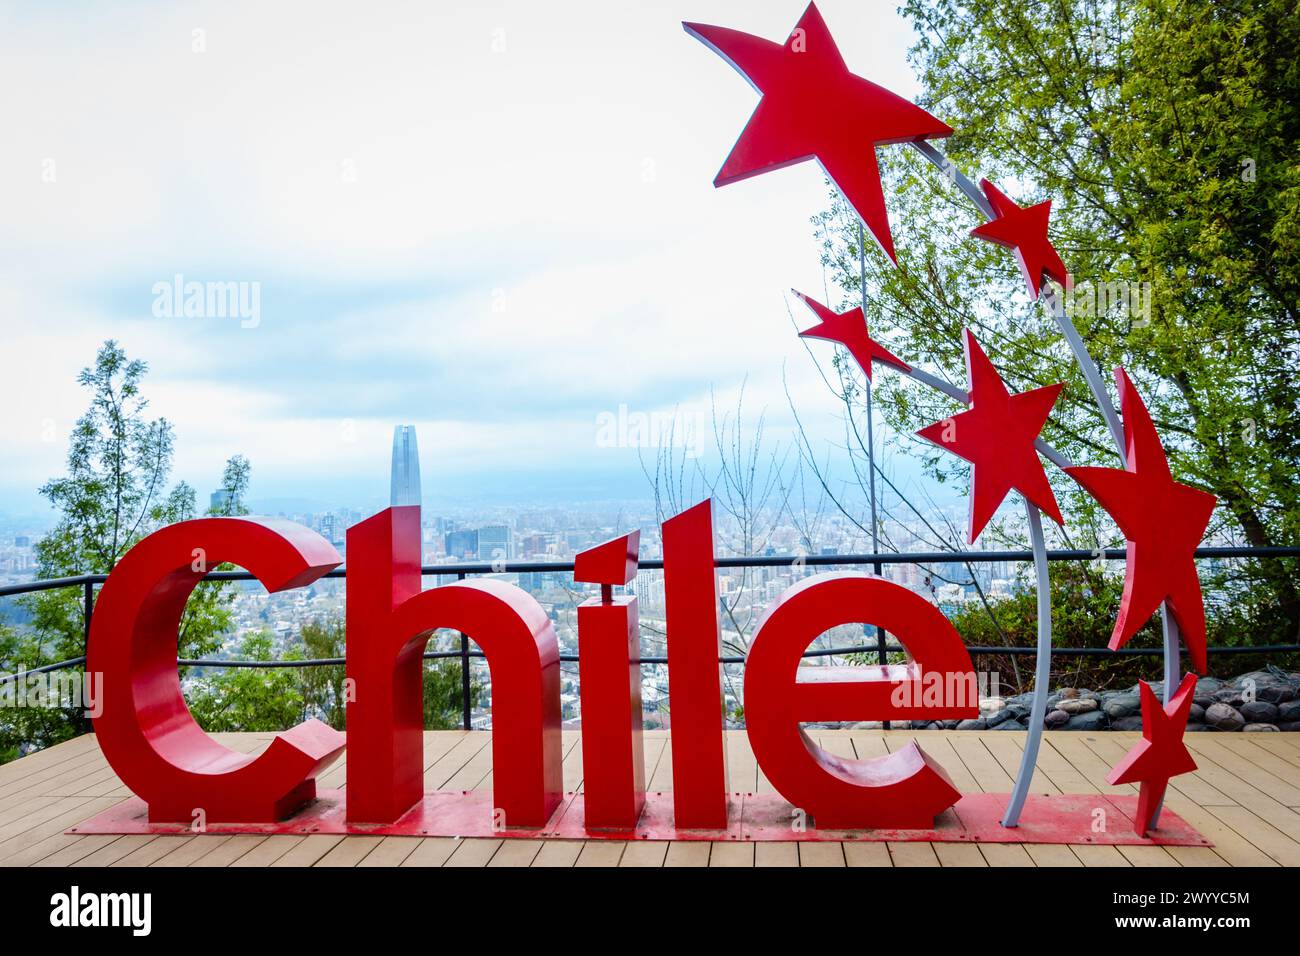 Santiago, Chile, September 18, 2022: Chile sign with Santiago skyline in the backdrop at Cerro San Cristobal park. Stock Photo